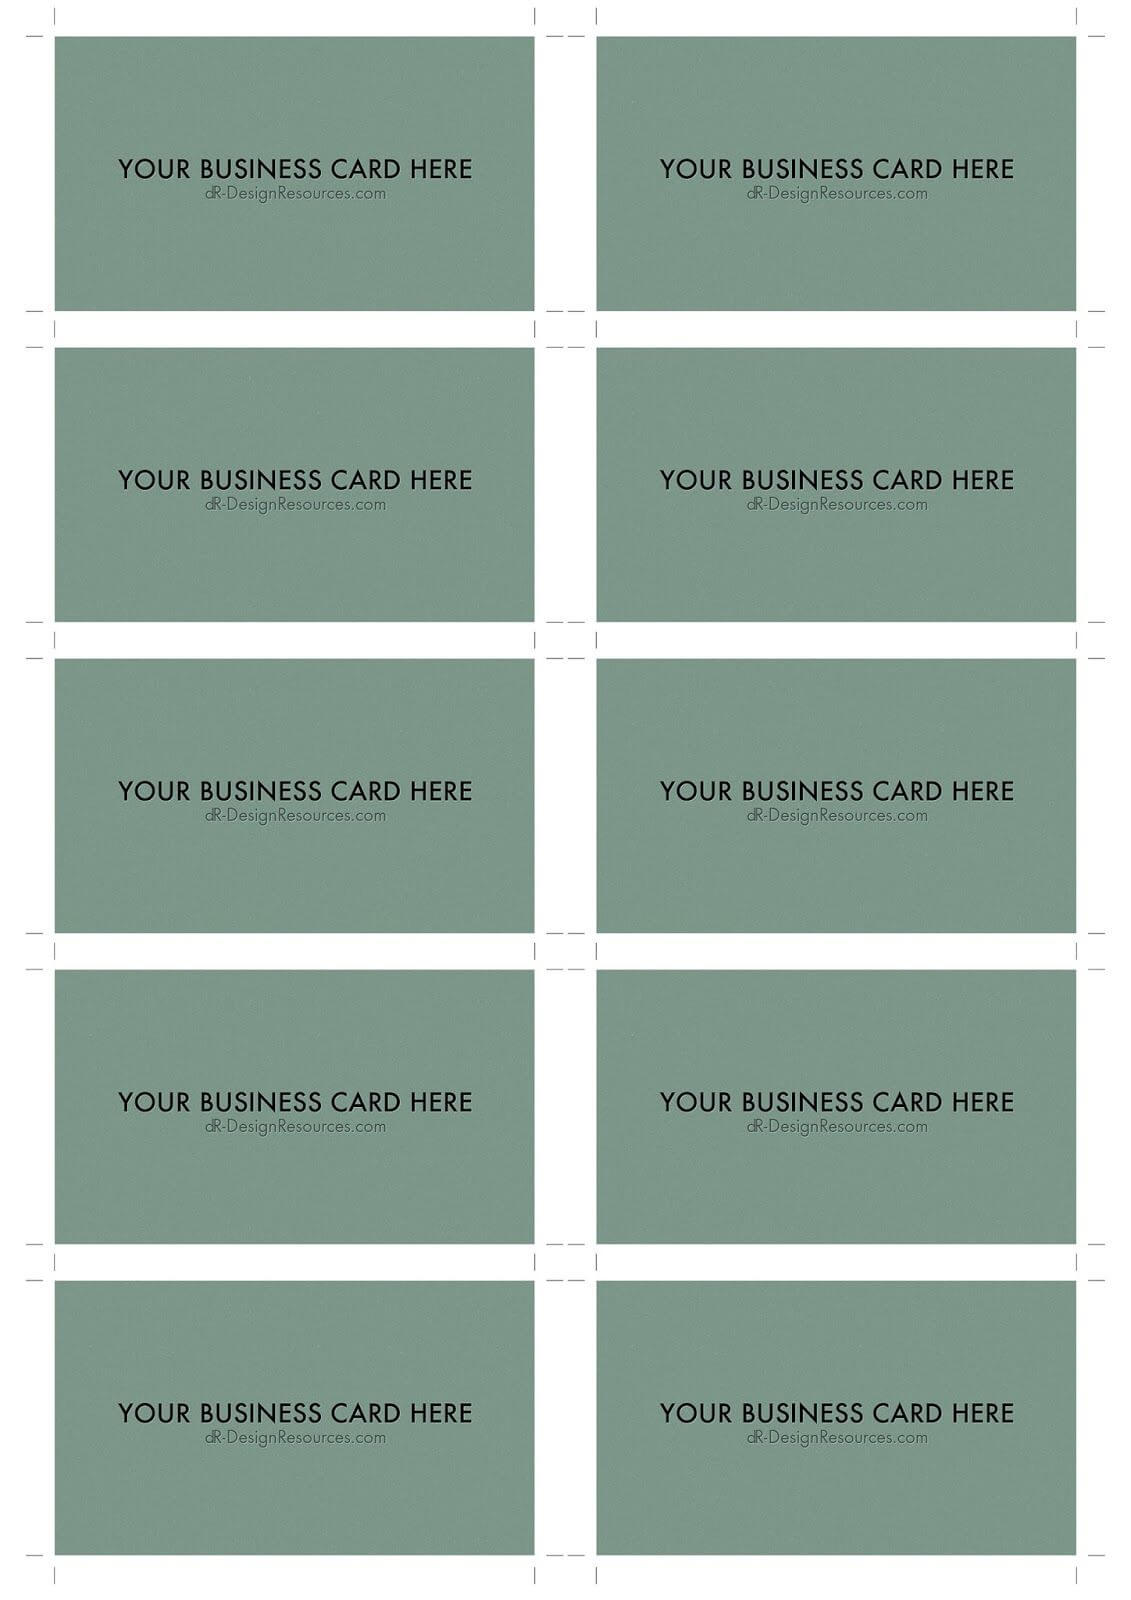 A4 Business Card Template Psd (10 Per Sheet) | Business Card Regarding Photoshop Business Card Template With Bleed